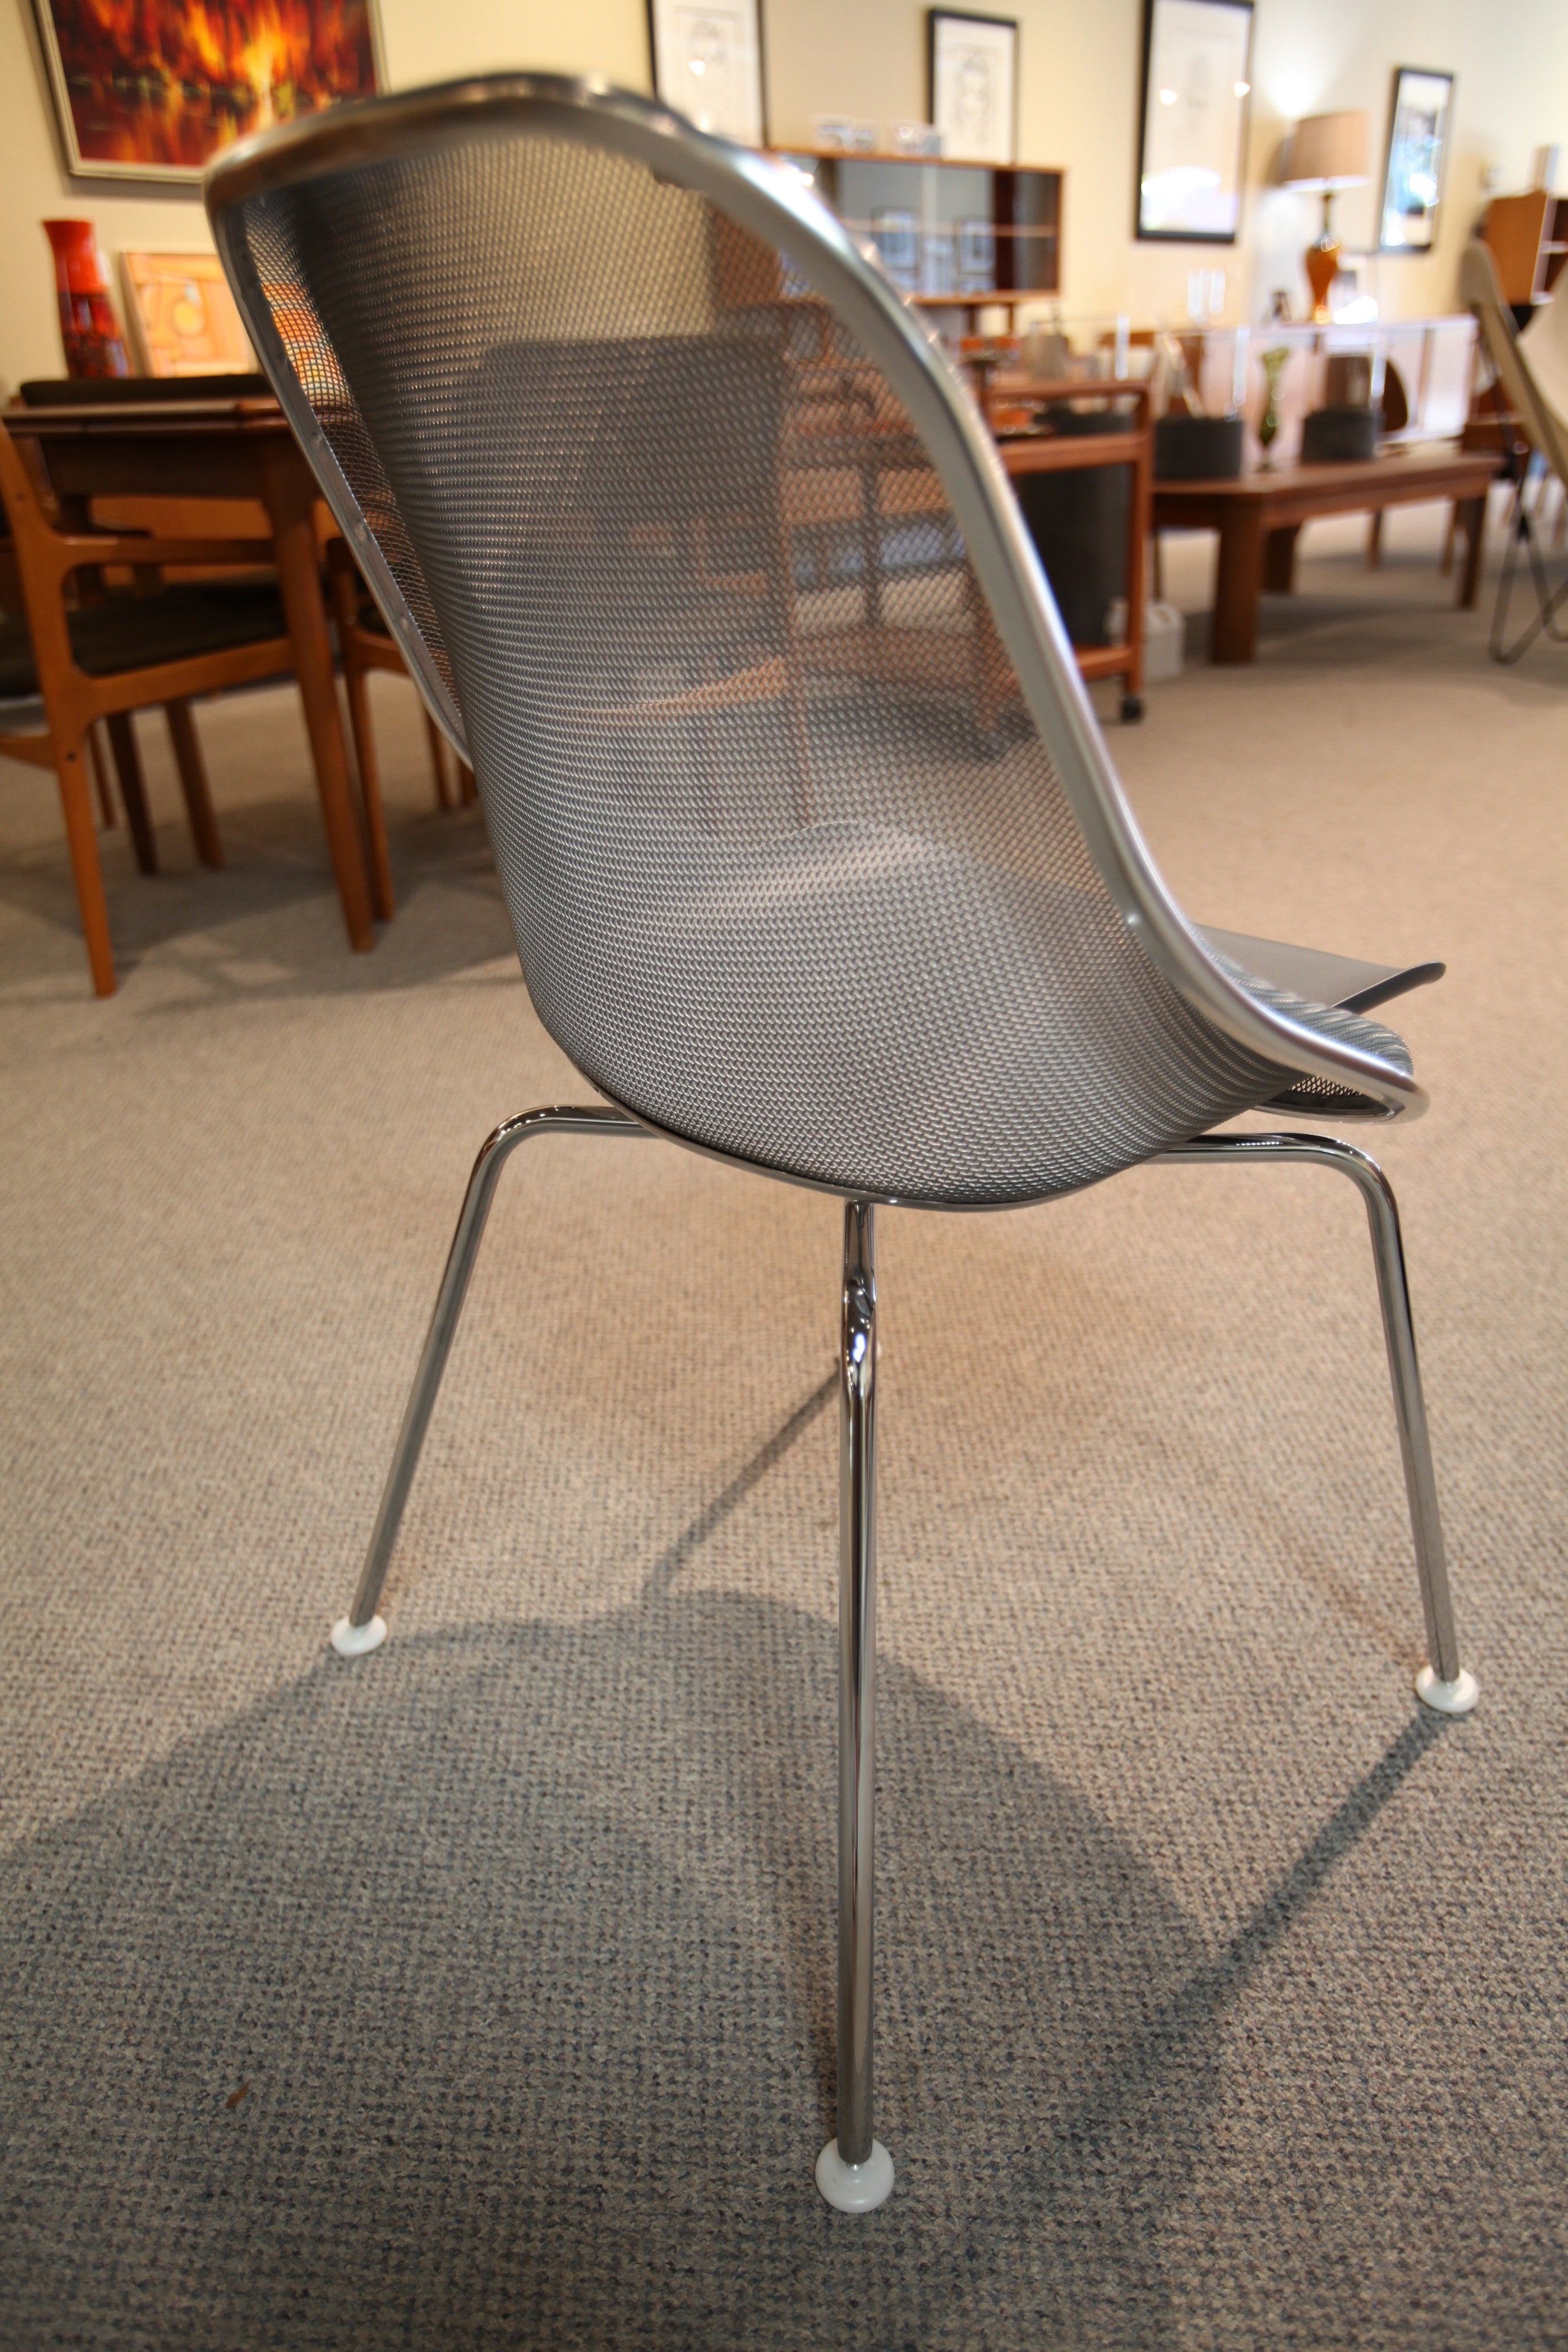 B&B Italia Iuta Chair. Retails for upwards of $2000 use (2 available)